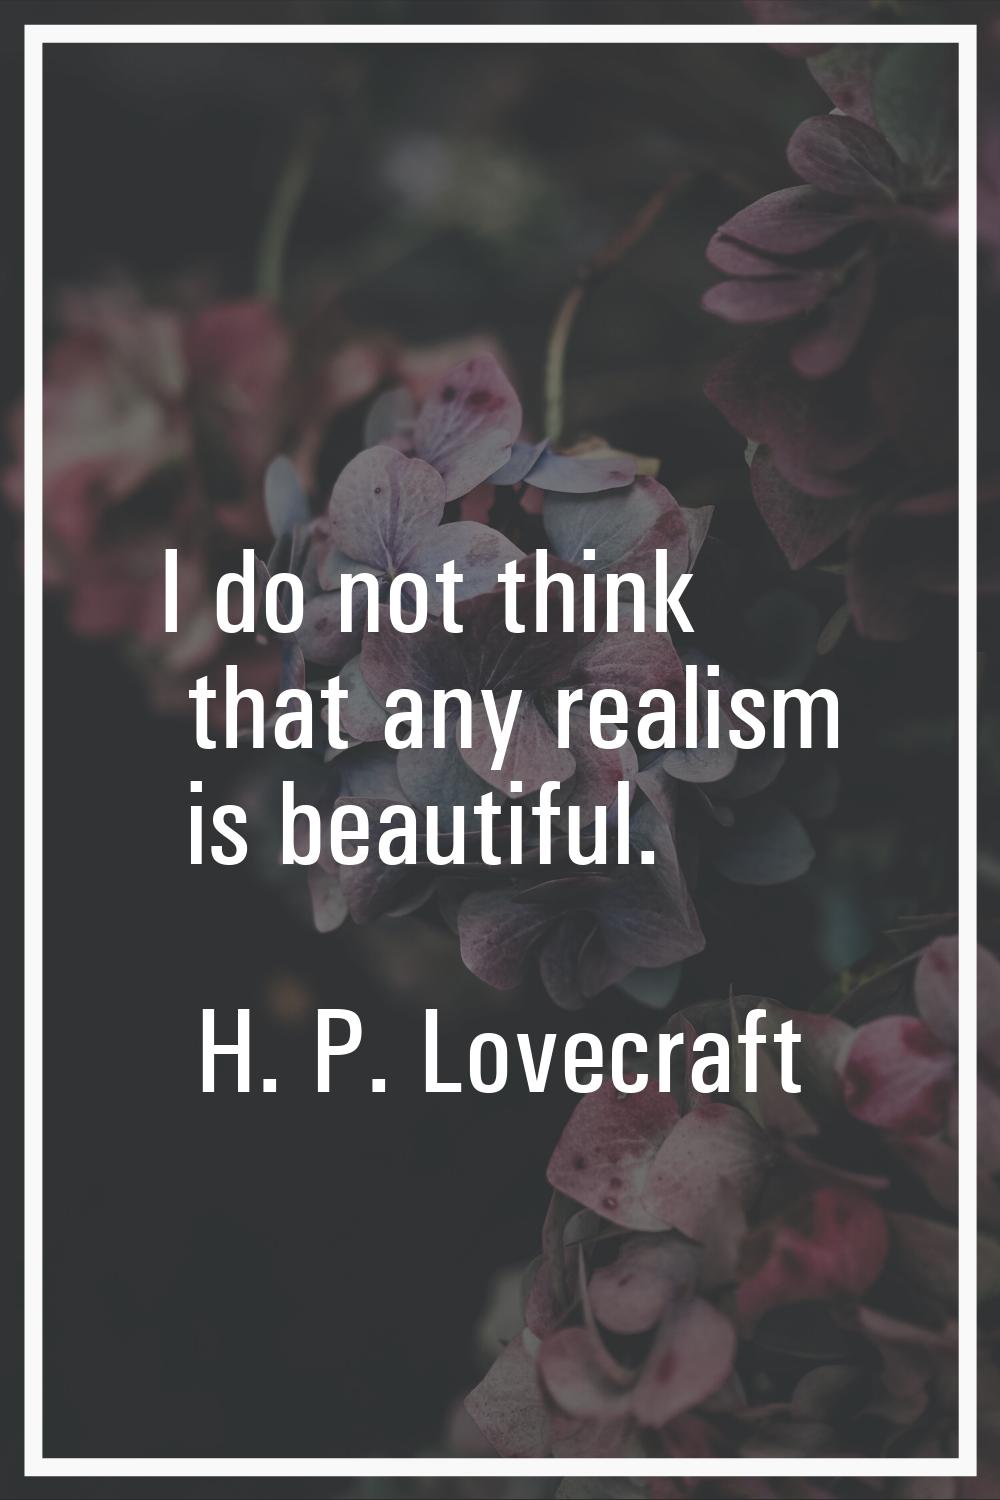 I do not think that any realism is beautiful.